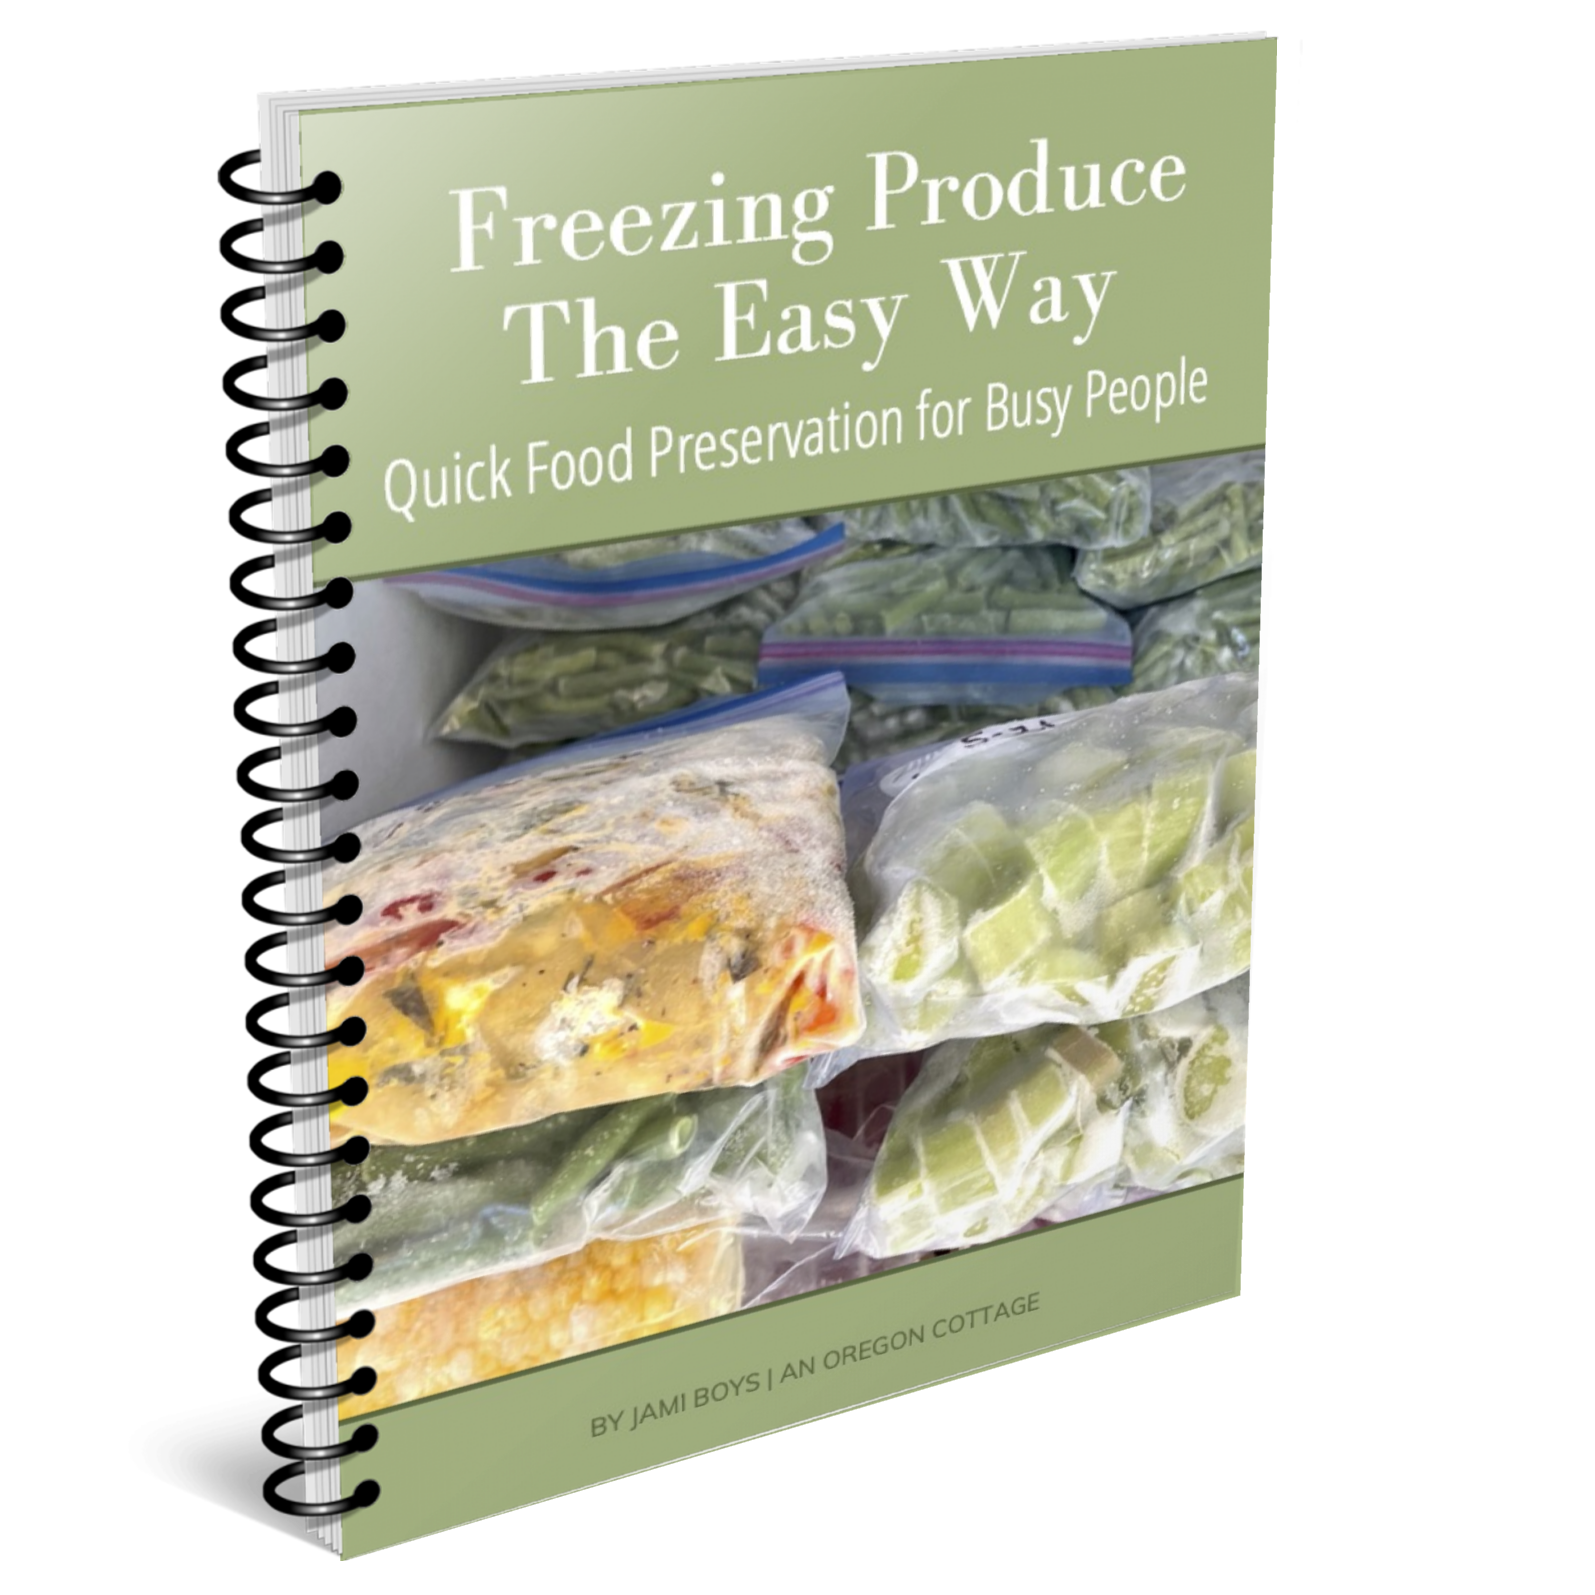 Freezing Produce The Easy Way (Shipped, Coil-Bound)